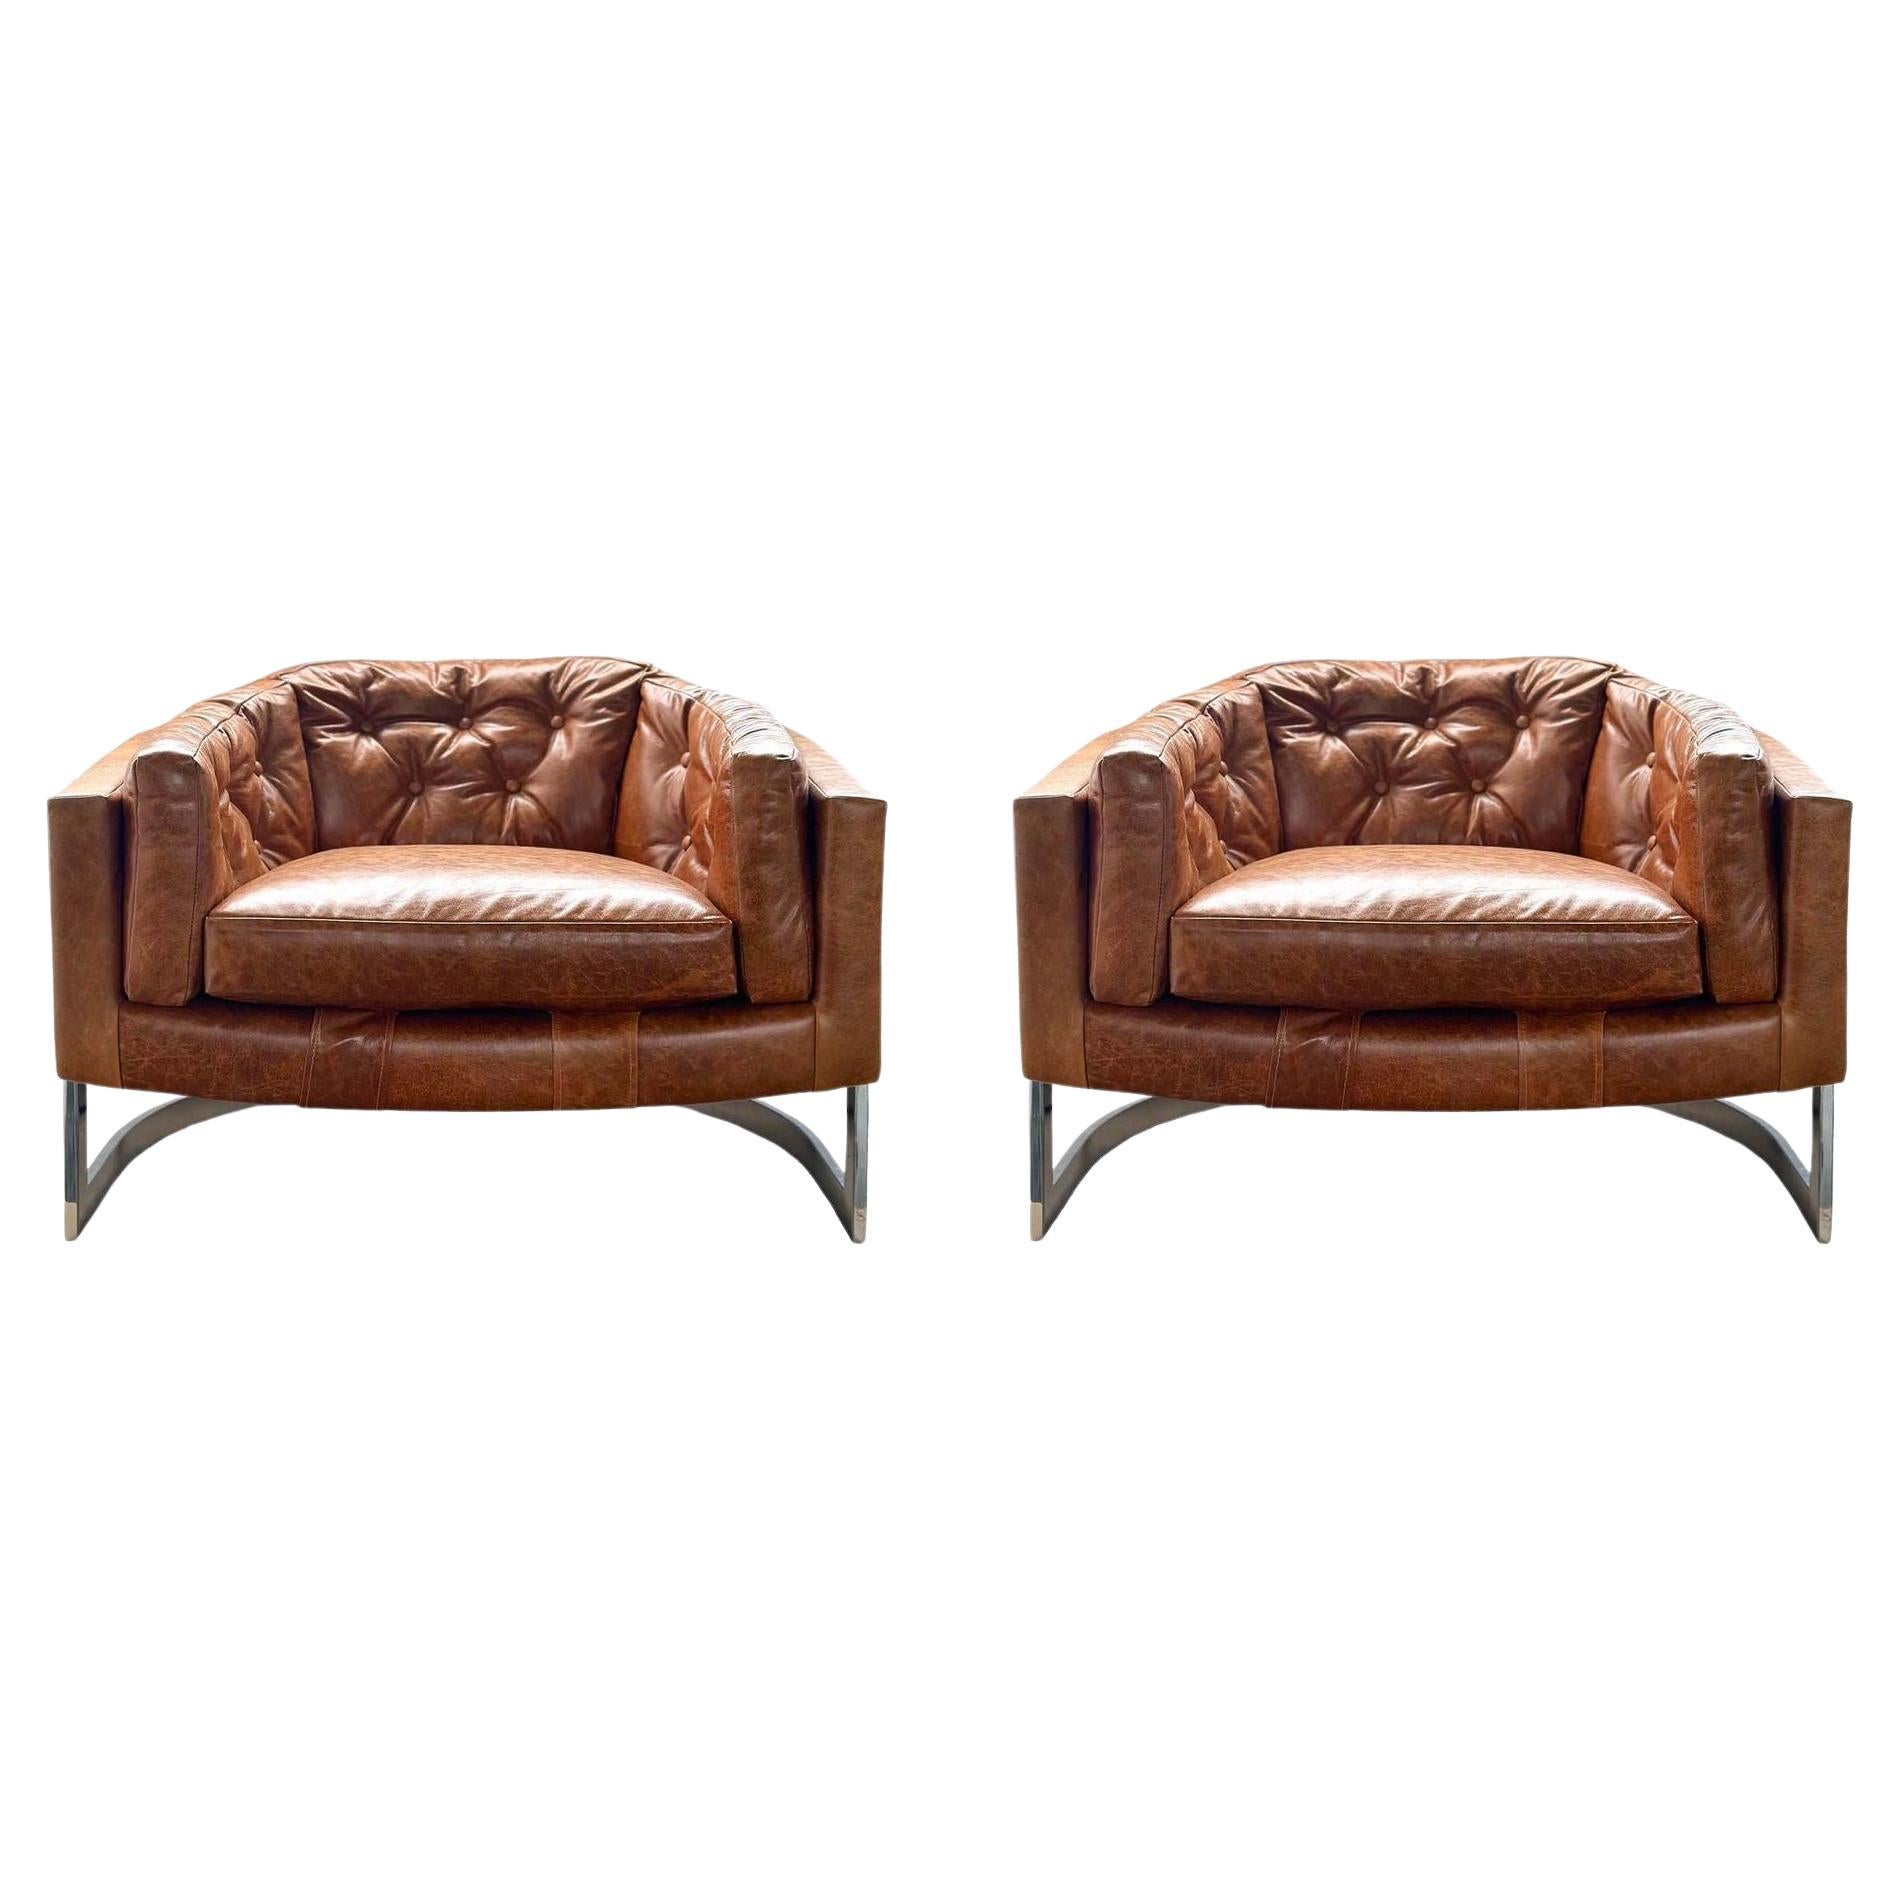 Pair of Vintage Leather Chairs in the Style of Milo Baughman For Sale